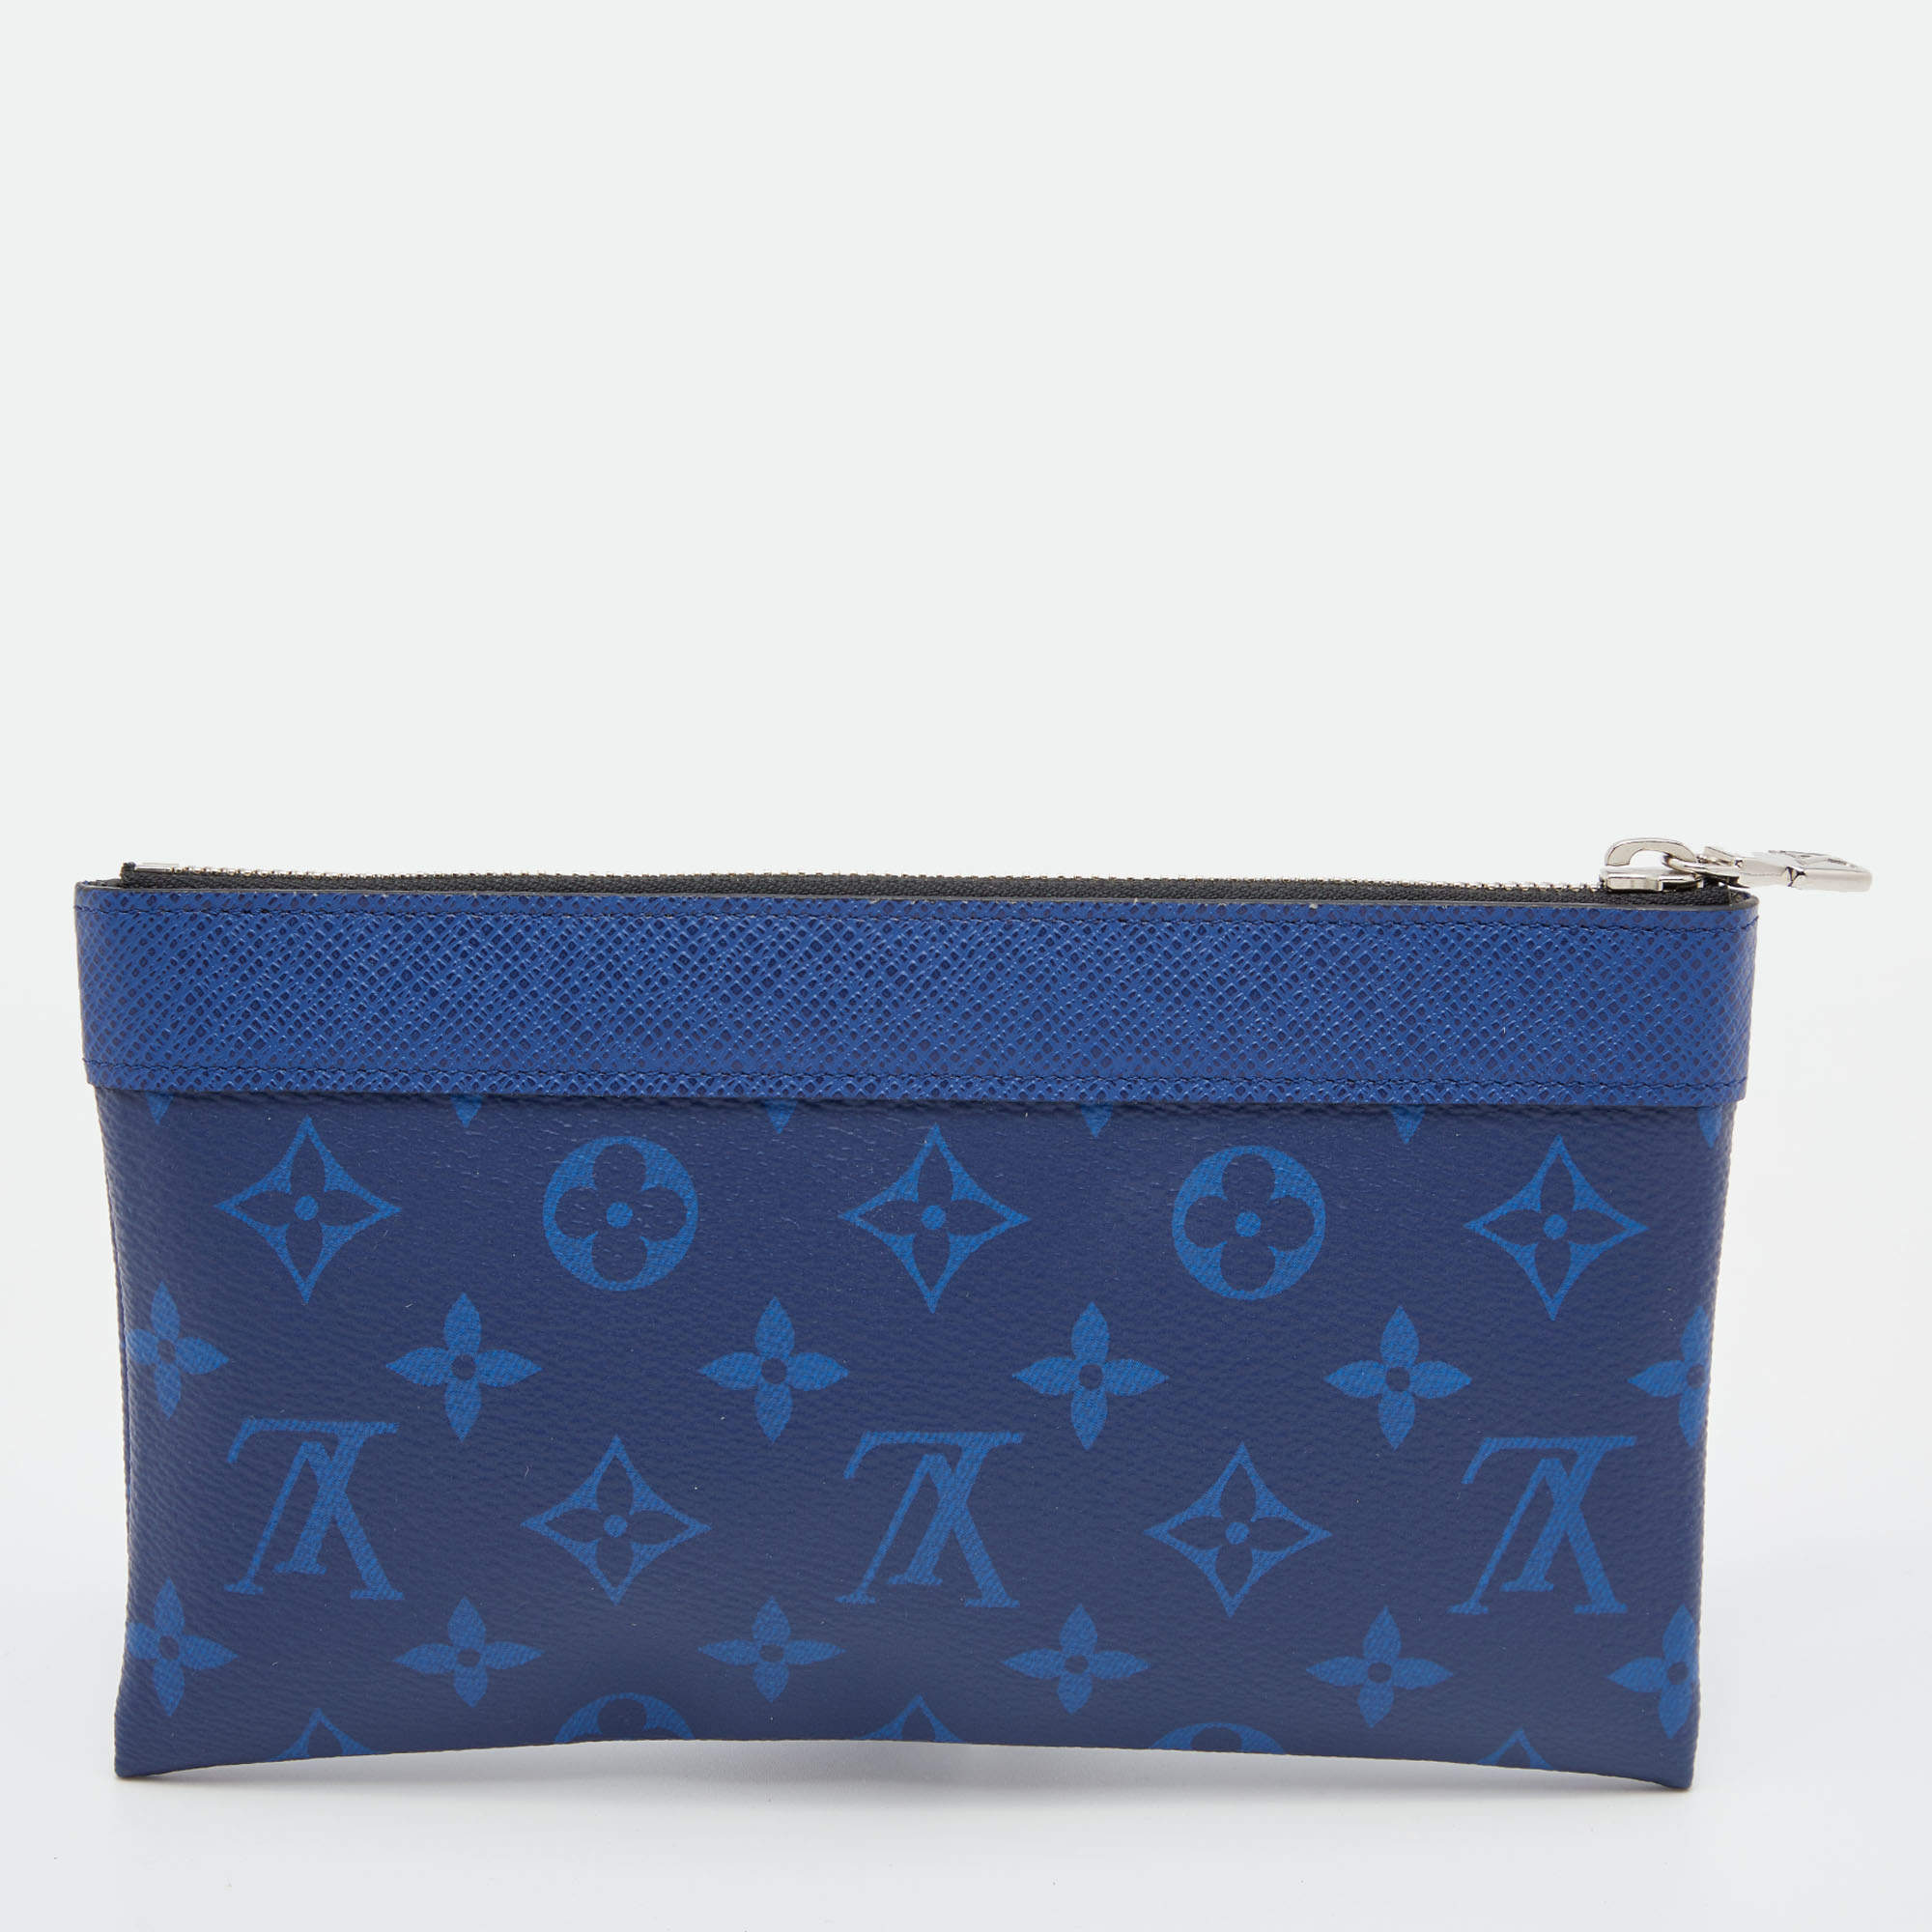 Louis Vuitton Discovery Pochette Damier Infini Leather GM at